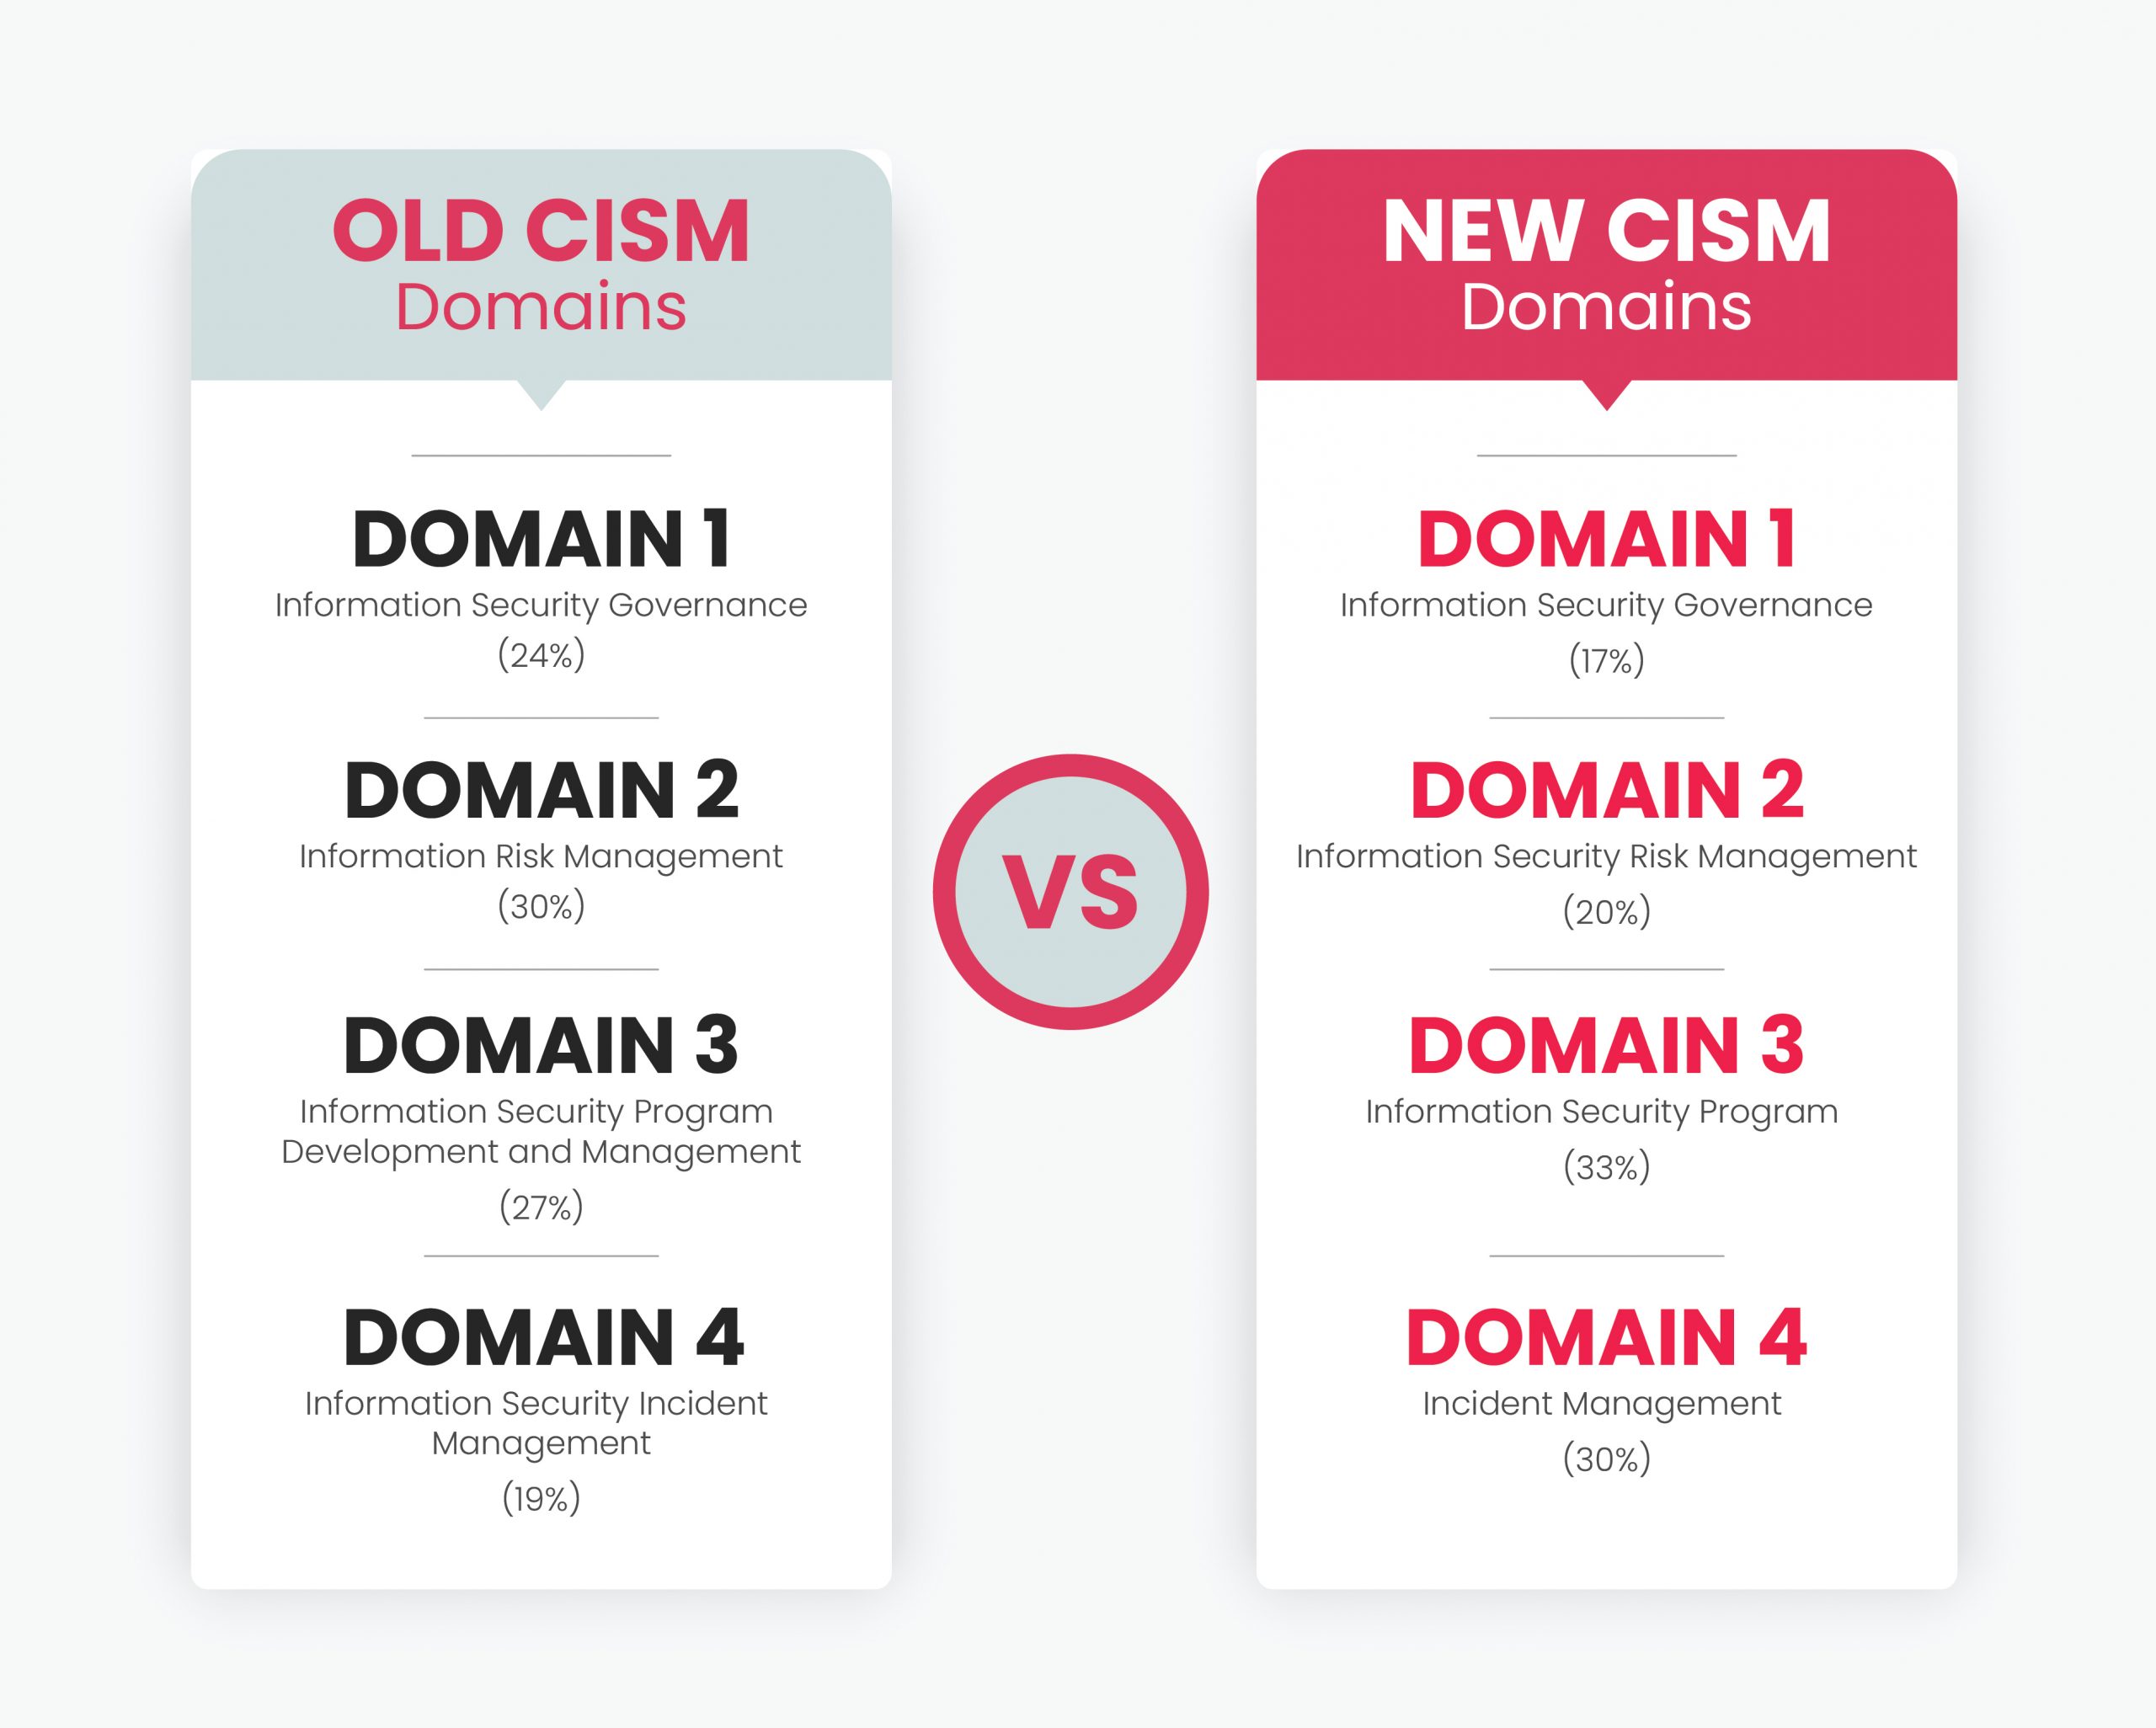 Old vs. New CISM Domains